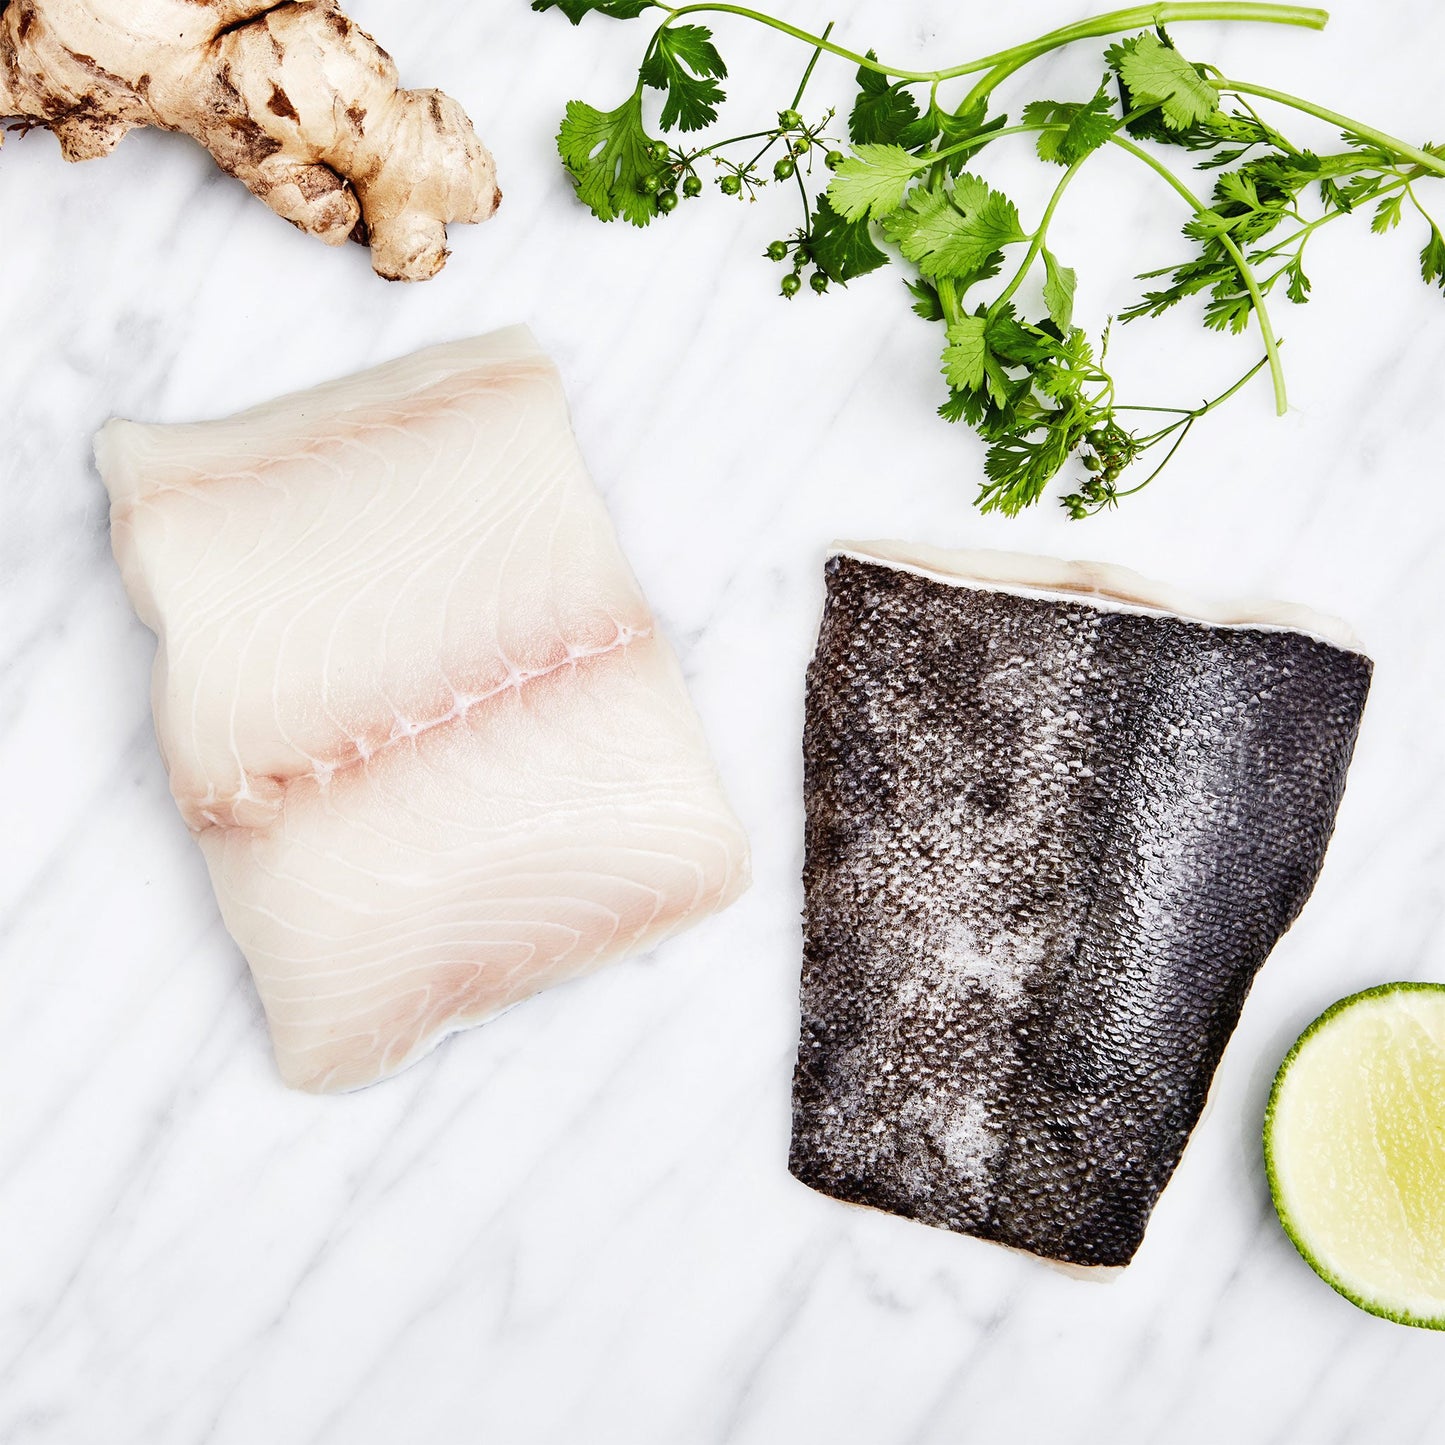 Black Cod: The Best Fish You've Never Eaten